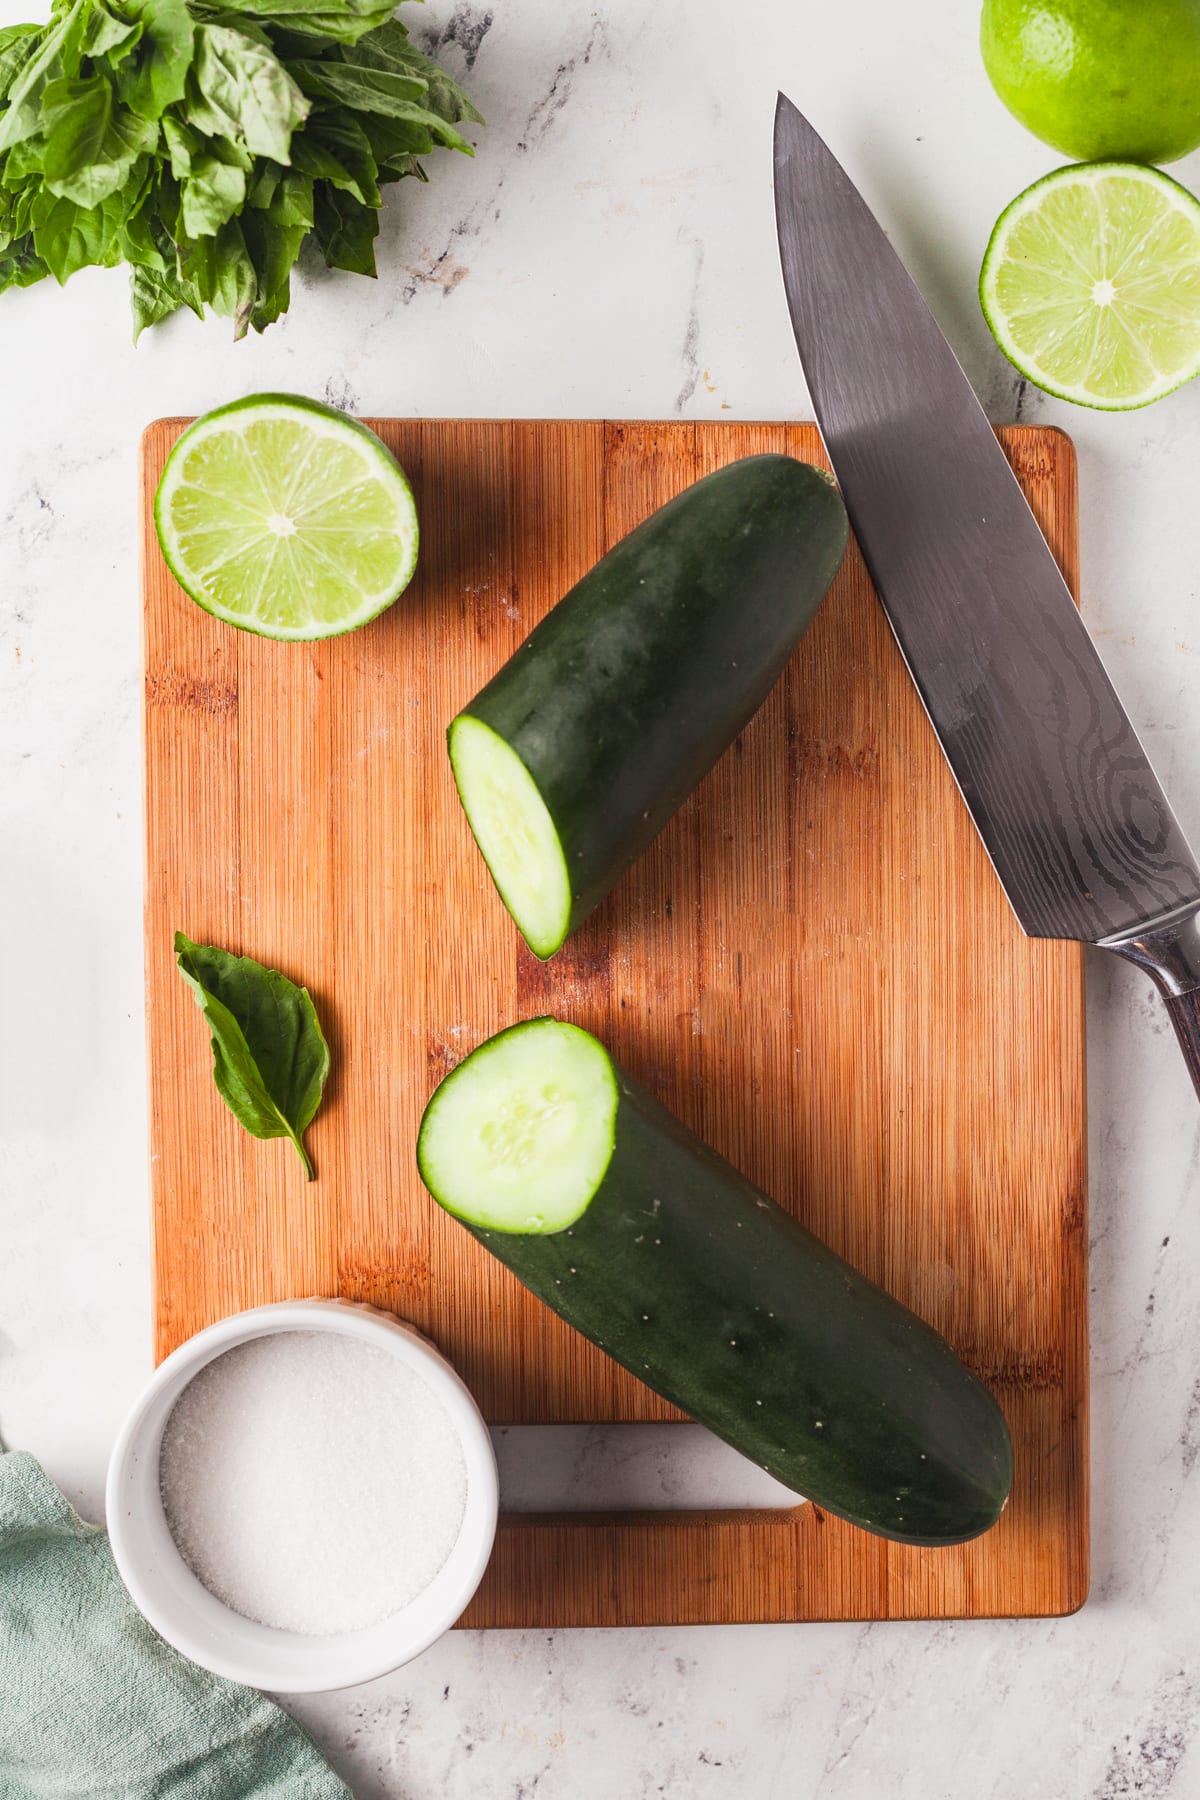 Ingredients for making a cucumber spritz. 